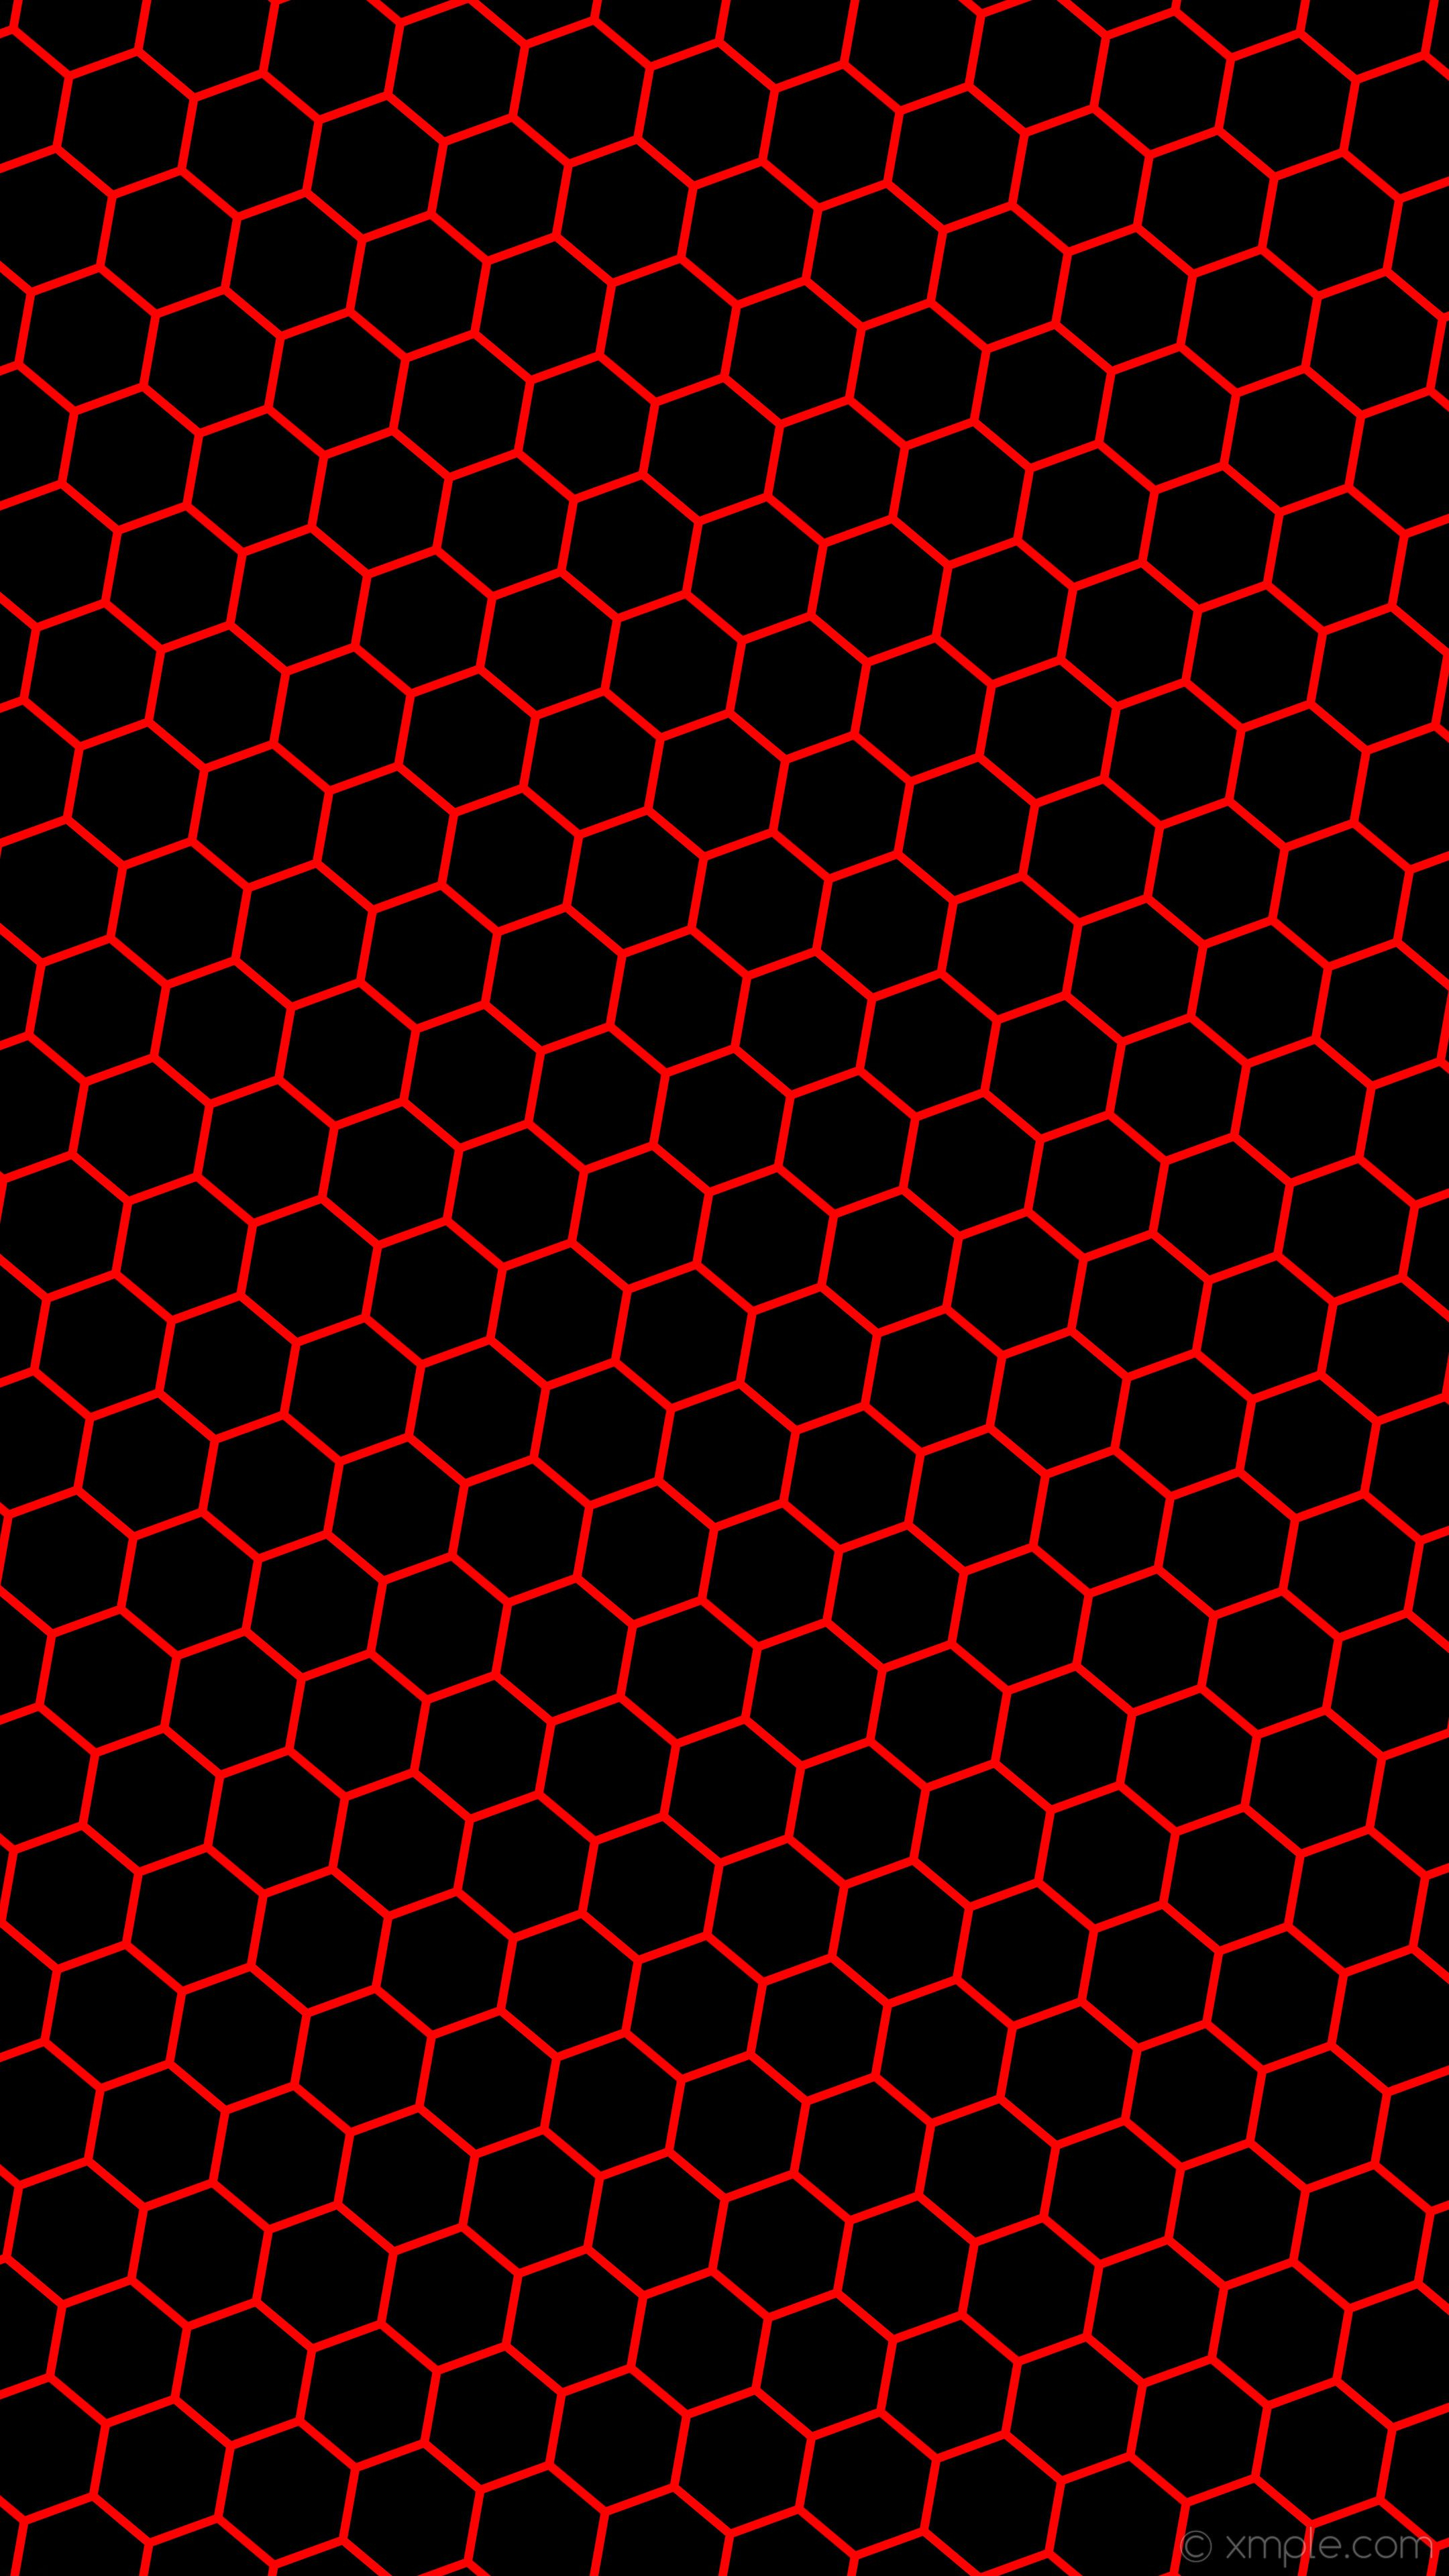 2160x3840 Red and Black Honeycomb Wallpapers Top Free Red and Black Honeycomb Backgrounds